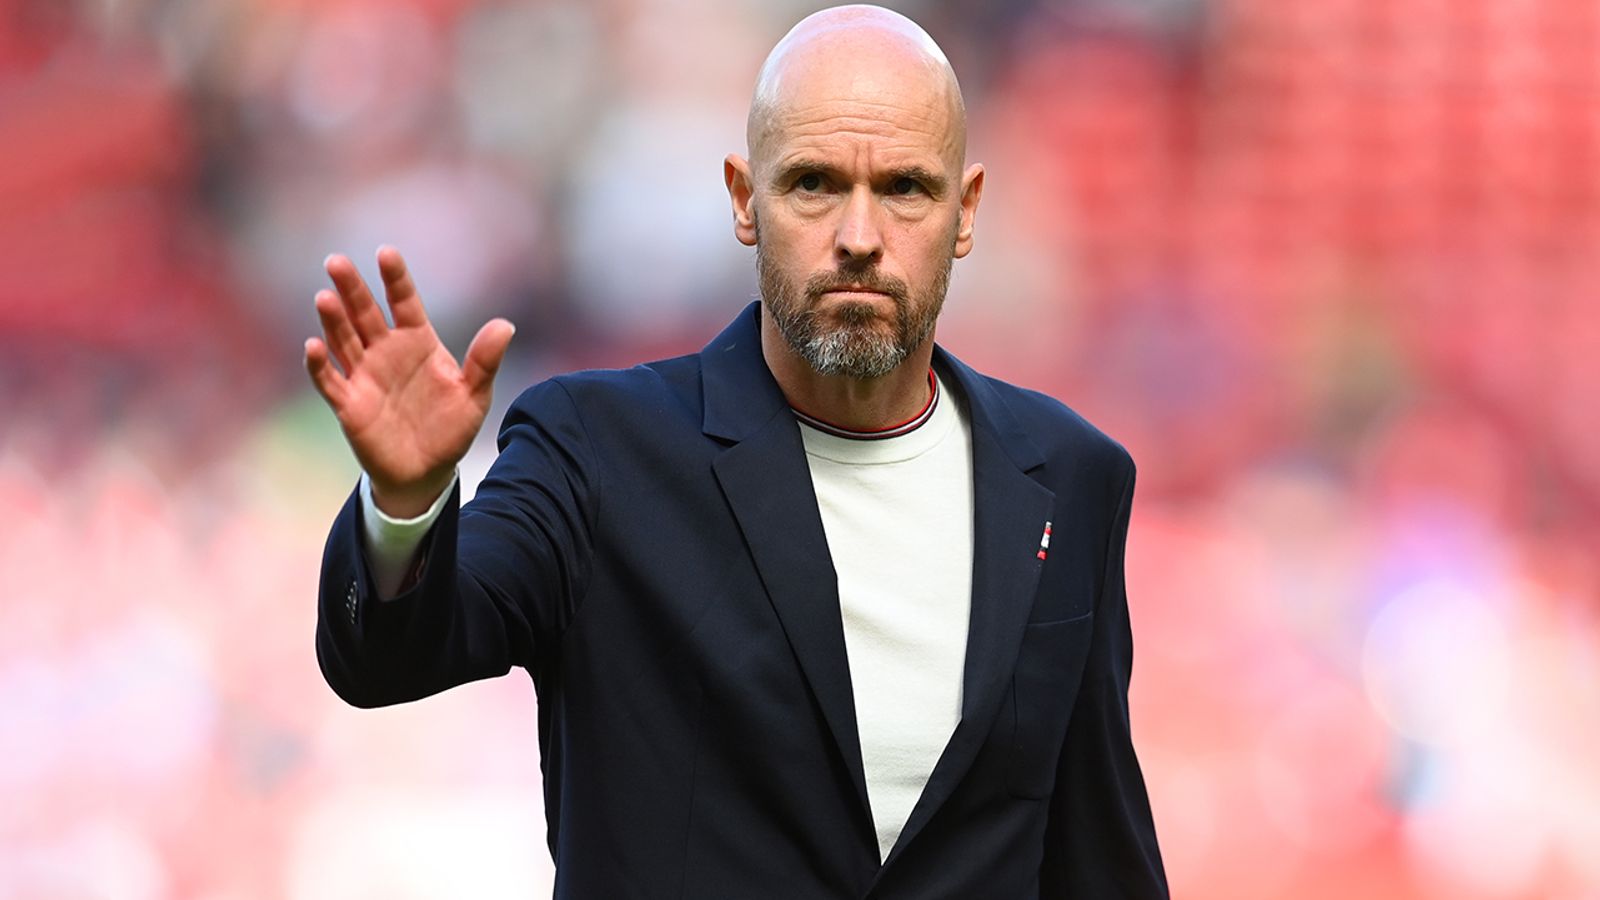 Erik Ten Hag promises to turn things around at Manchester after their second 3-0 home loss in seven days as he acknowledges liability regarding their unfortunate structure and Carabao Cup exit